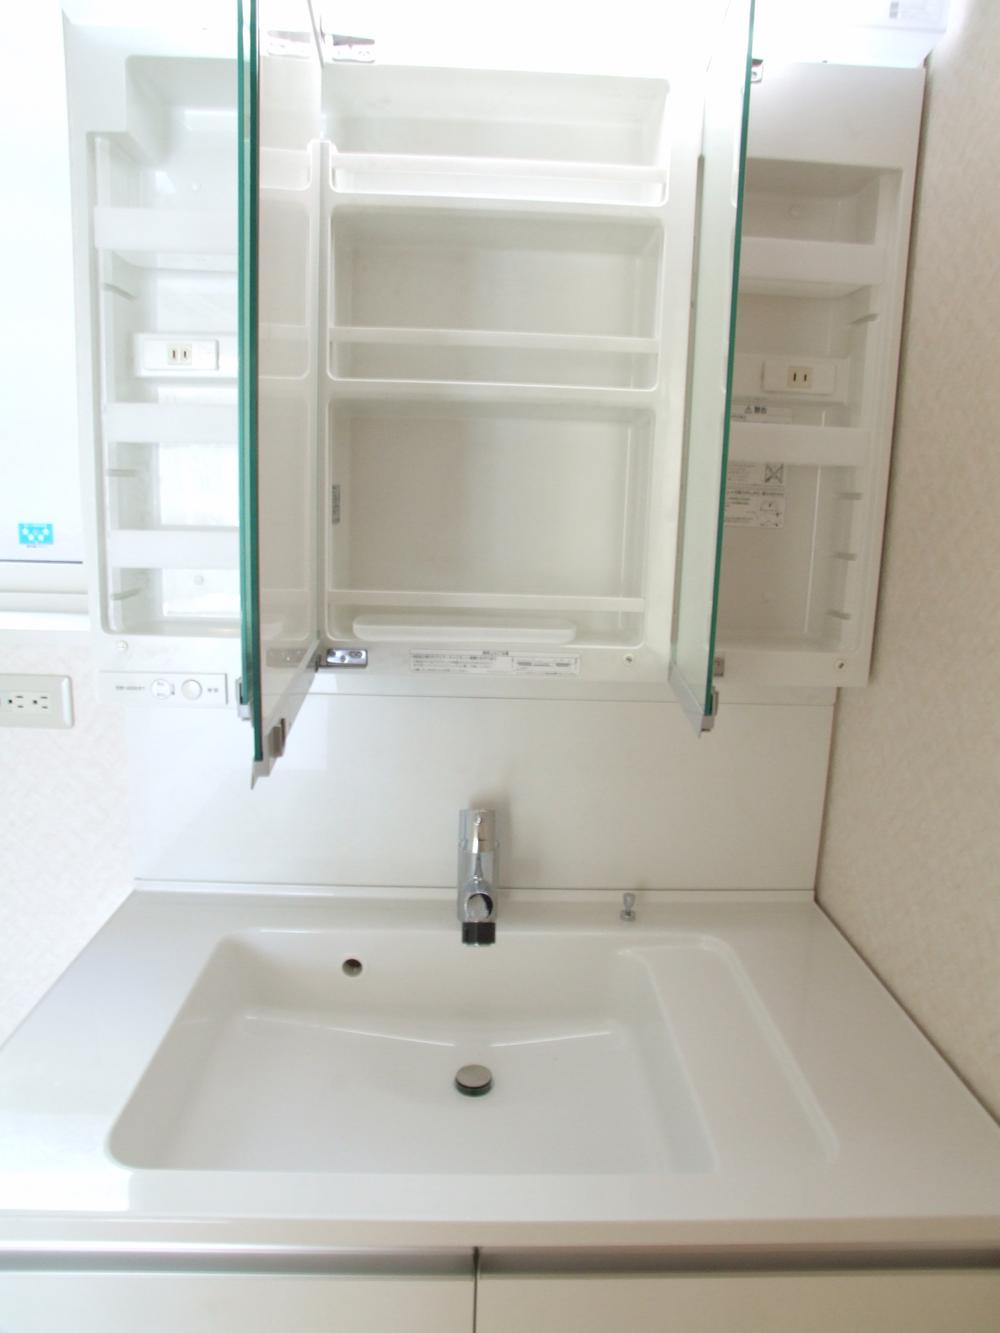 Other Equipment. Vanity and easy to use wide. Also fits neat small items such as make-up water in all mirror surface storage